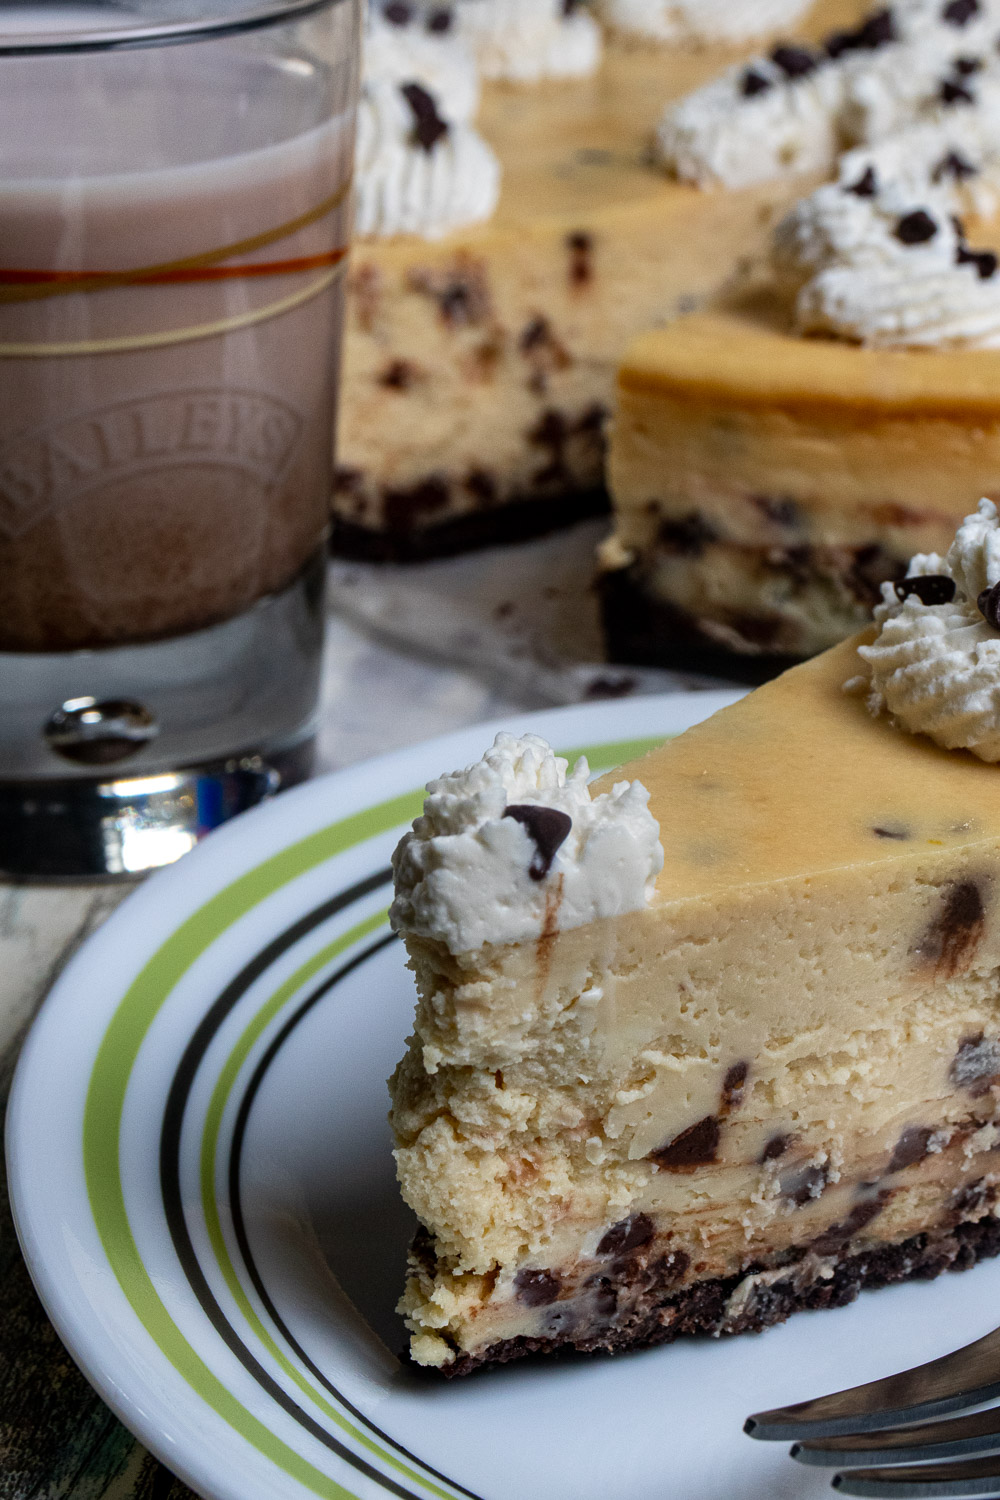 A slice of Bailey's cheesecake with chocolate chips and glass of Bailey's next to it.